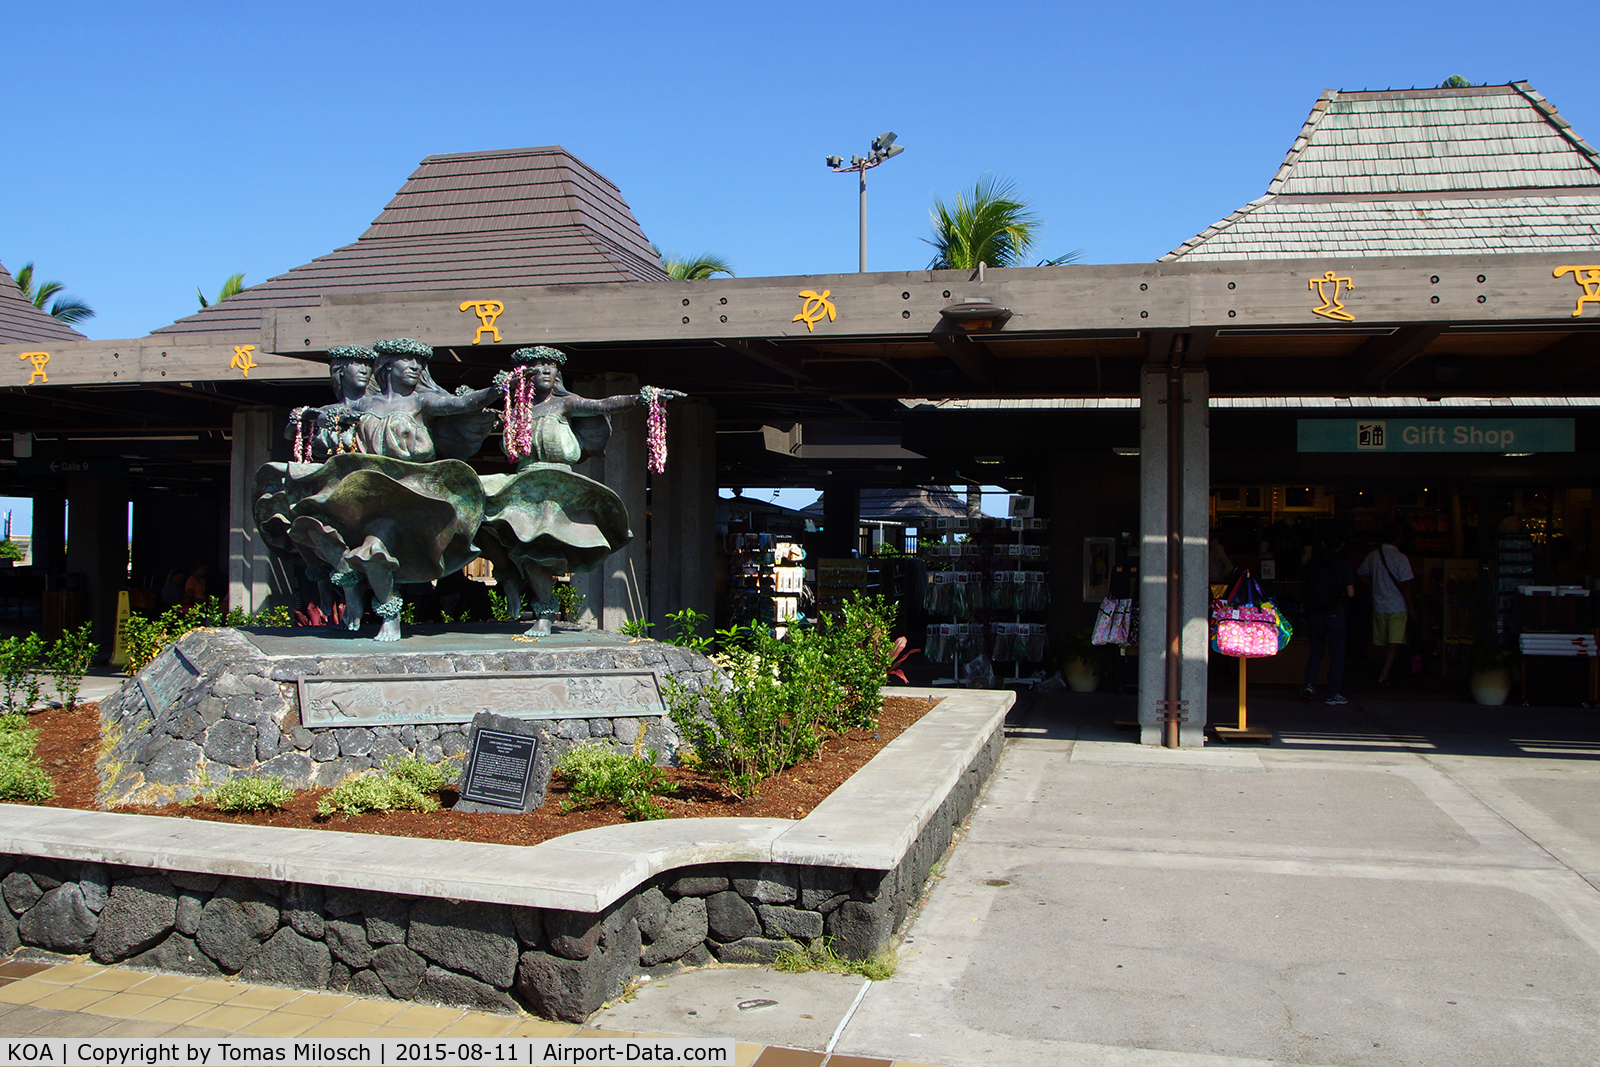 Kona International At Keahole Airport (KOA) - There seems to be no need for a roof in Kona...